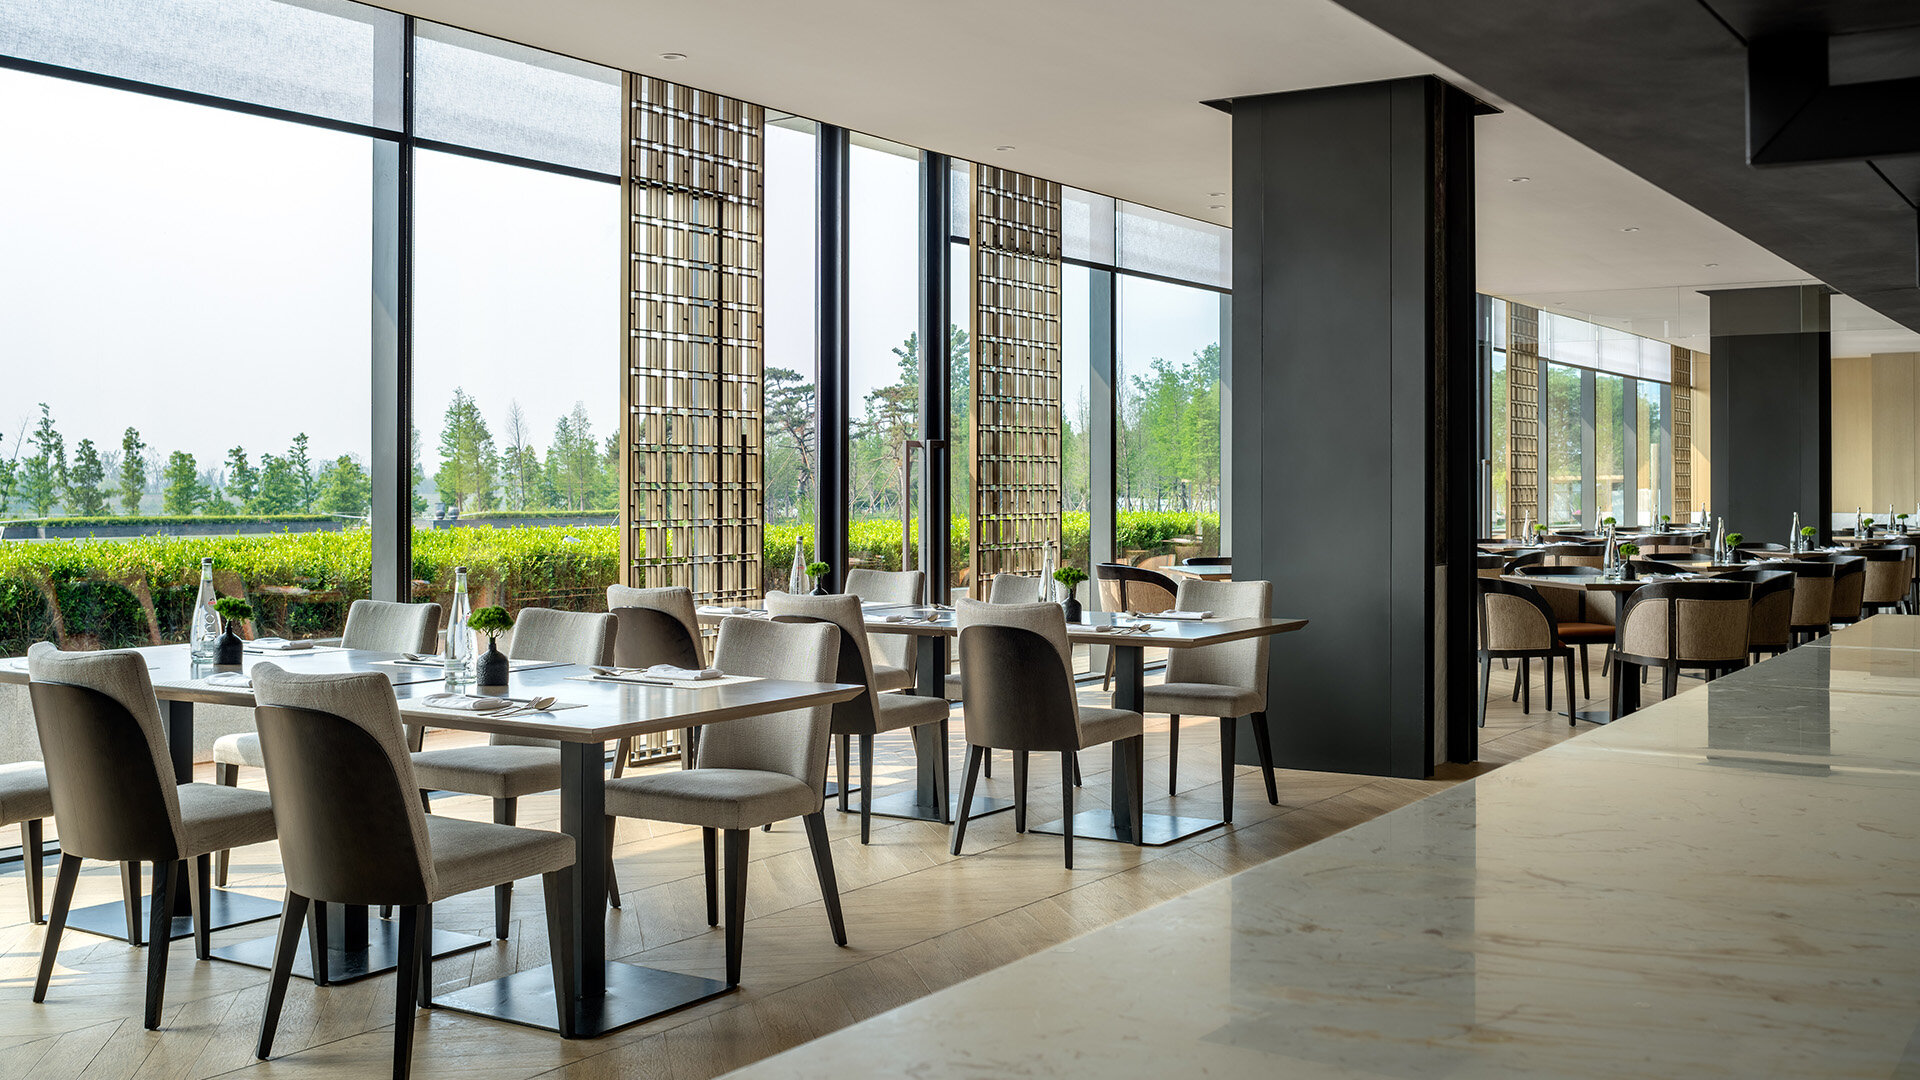 All day dining room design of Nanjing Business Hotel